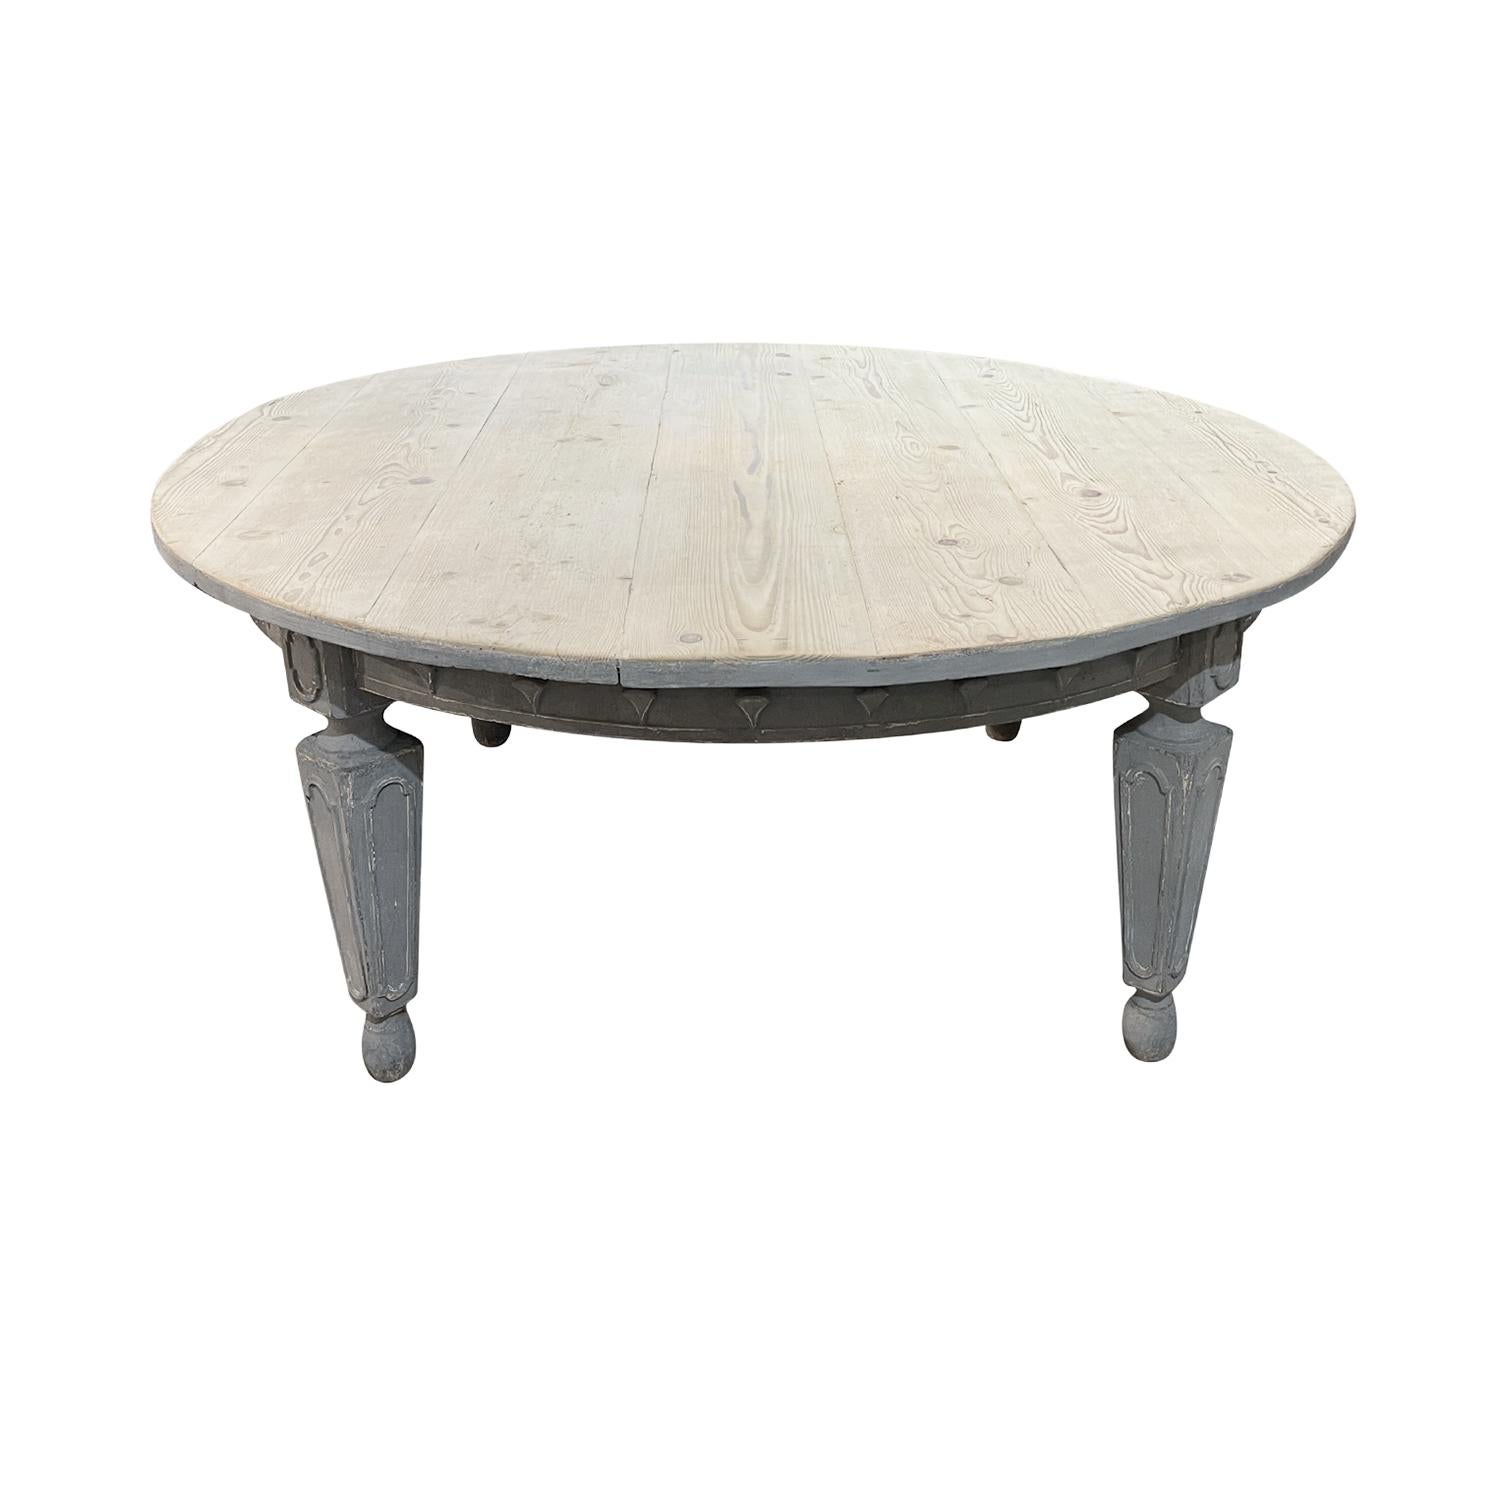 Hand-Carved 19th Century Italian Pine Dining Room Table - Antique Tuscan Conference Table For Sale